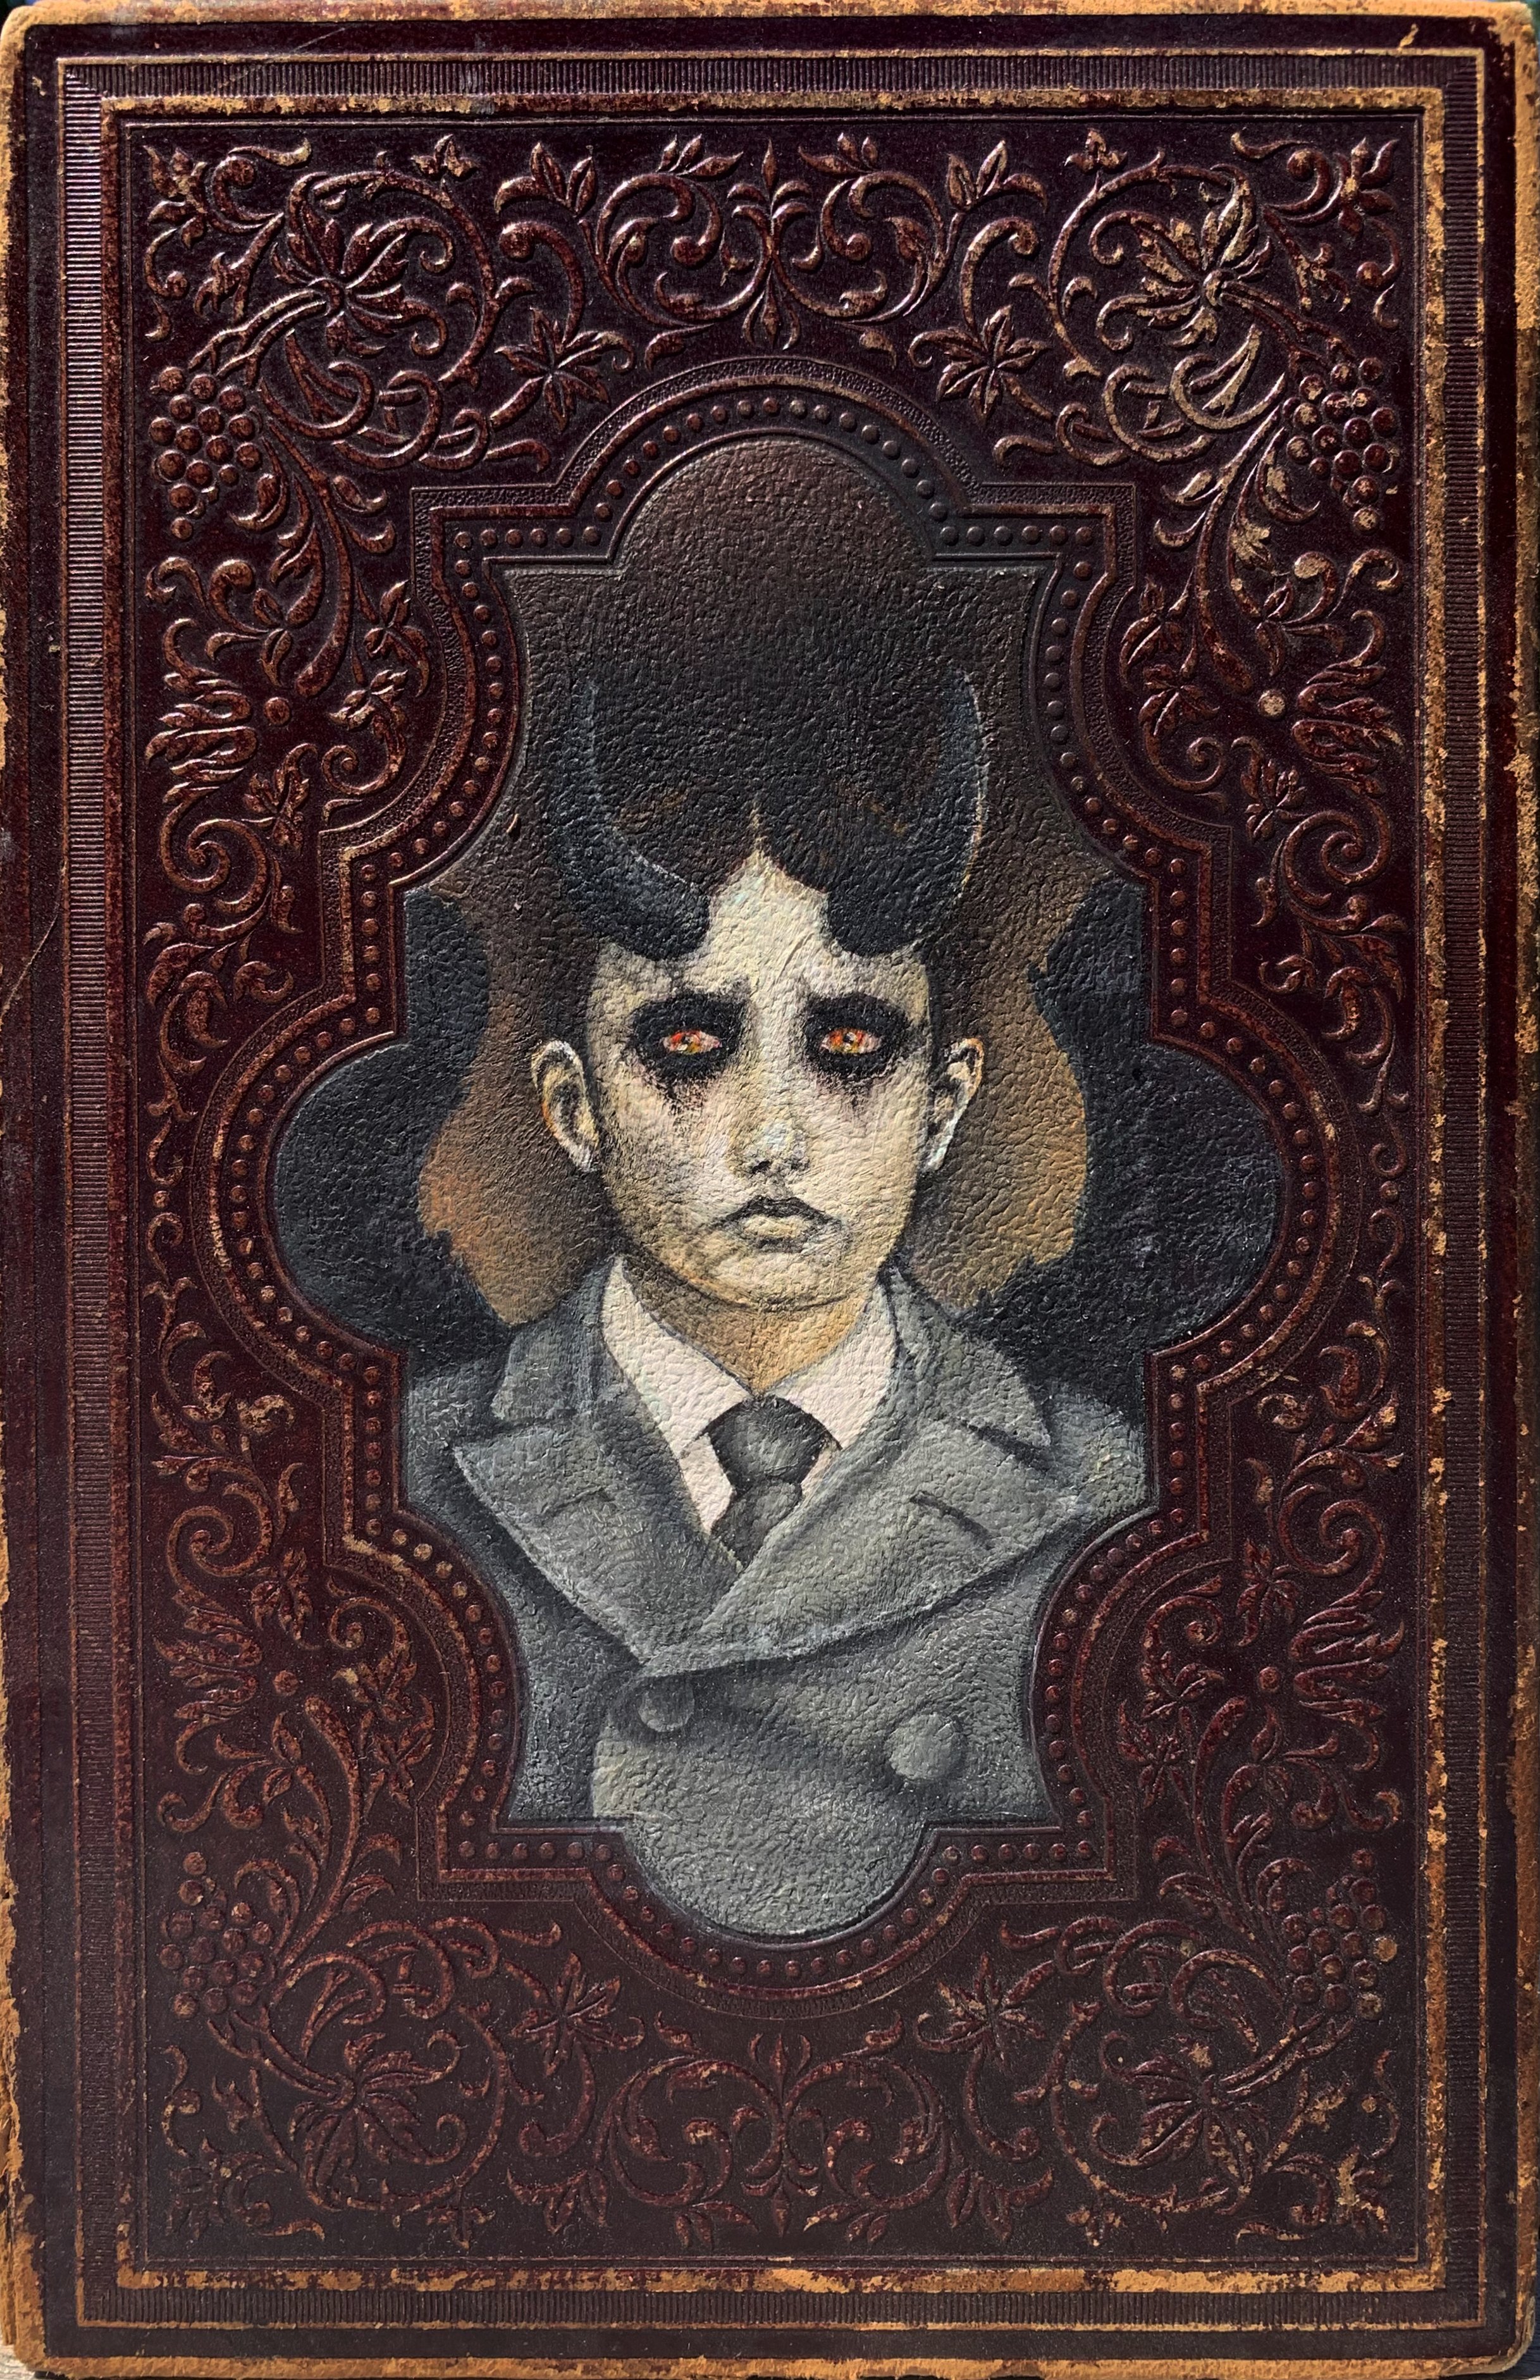   THE PRINCE   6.25” x 9.75”  Oil on Leather-bound Book Cover       